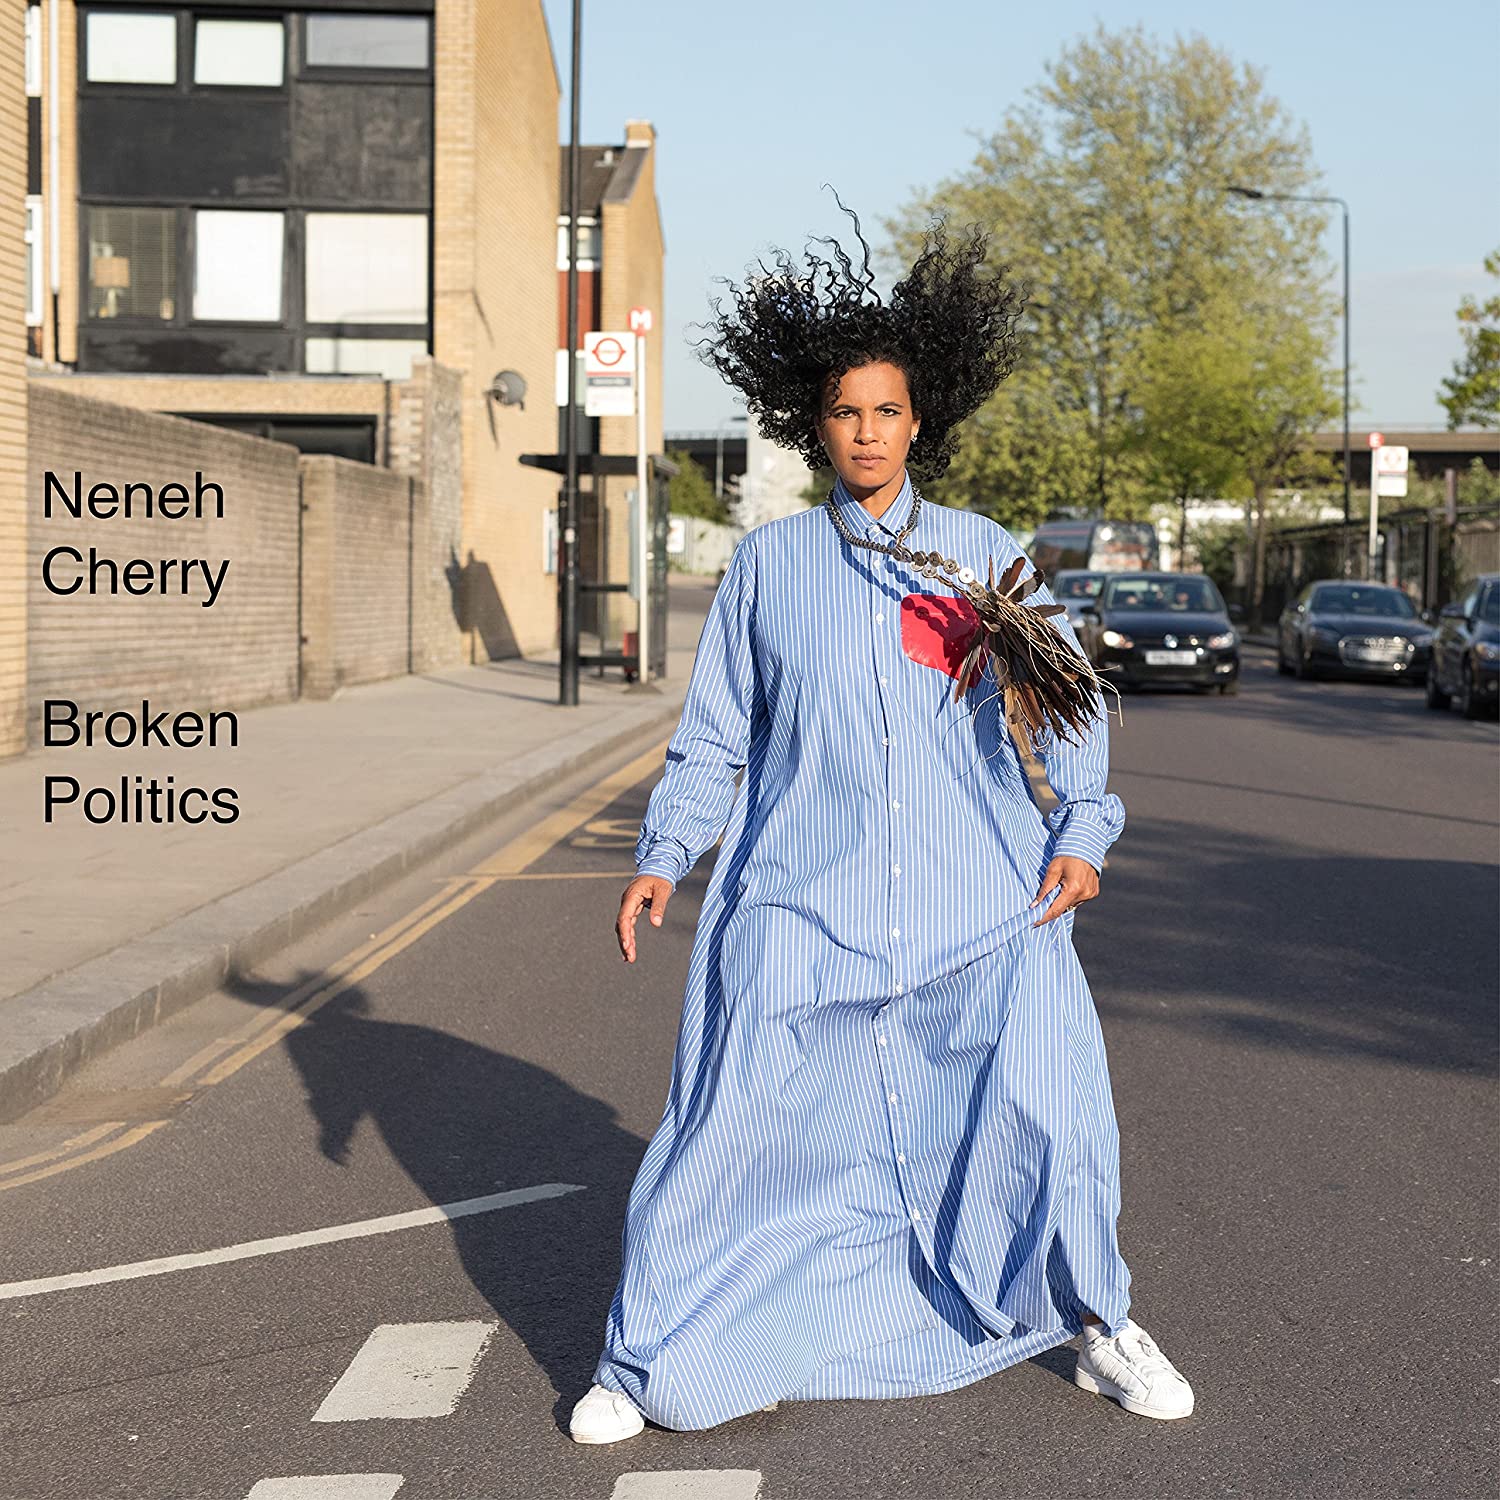 the album cover for broken politics. pictured, cherry is in a windswept floor length pinstred blue gown and white sneakers. their hair floats straight into the air. behind them, a  residential building. trees and cars litter the street